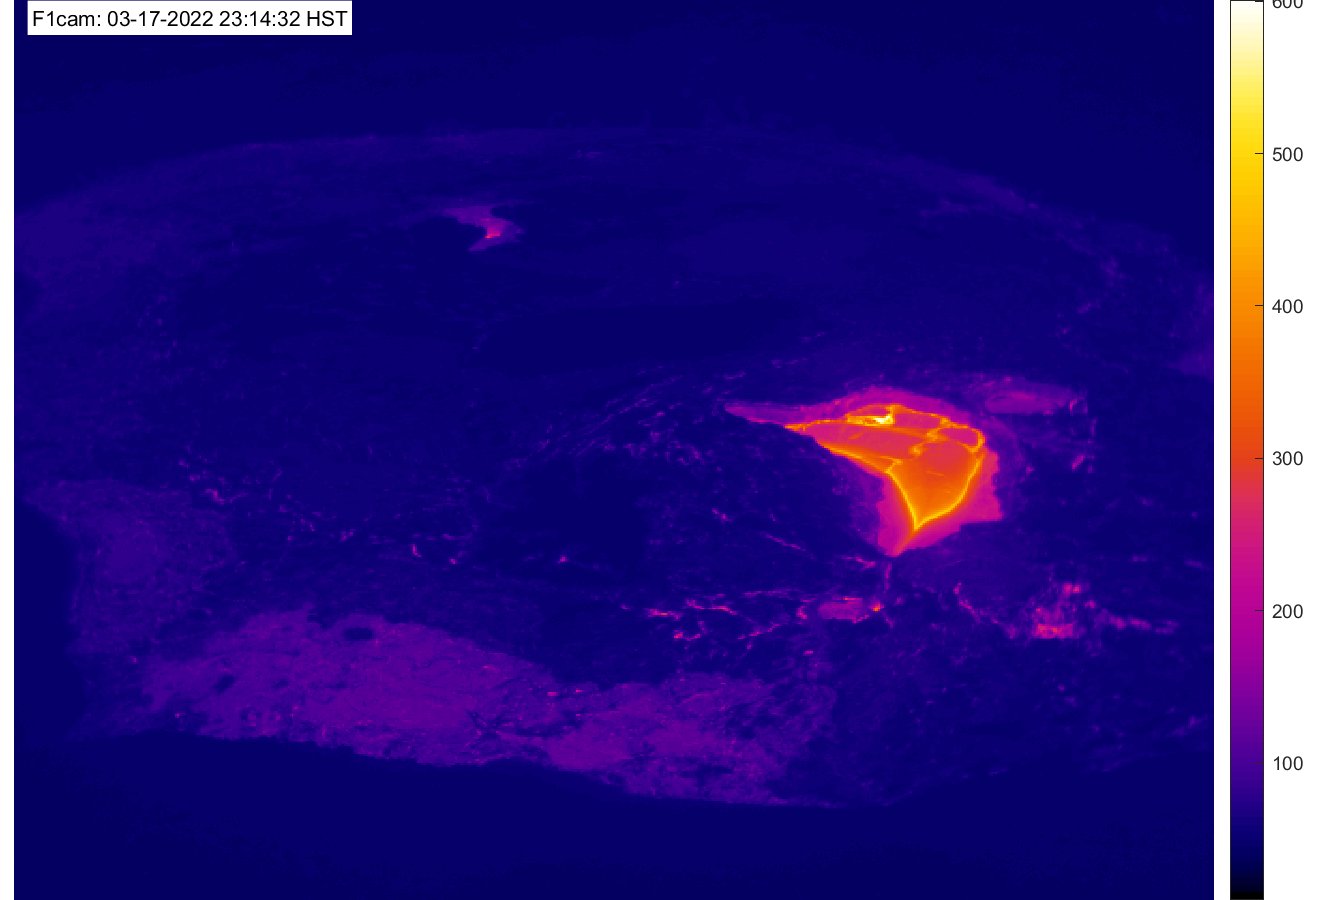 Thermal view of Kilauea's lava lake this morning (image: HVO / USGS thermal webcam)